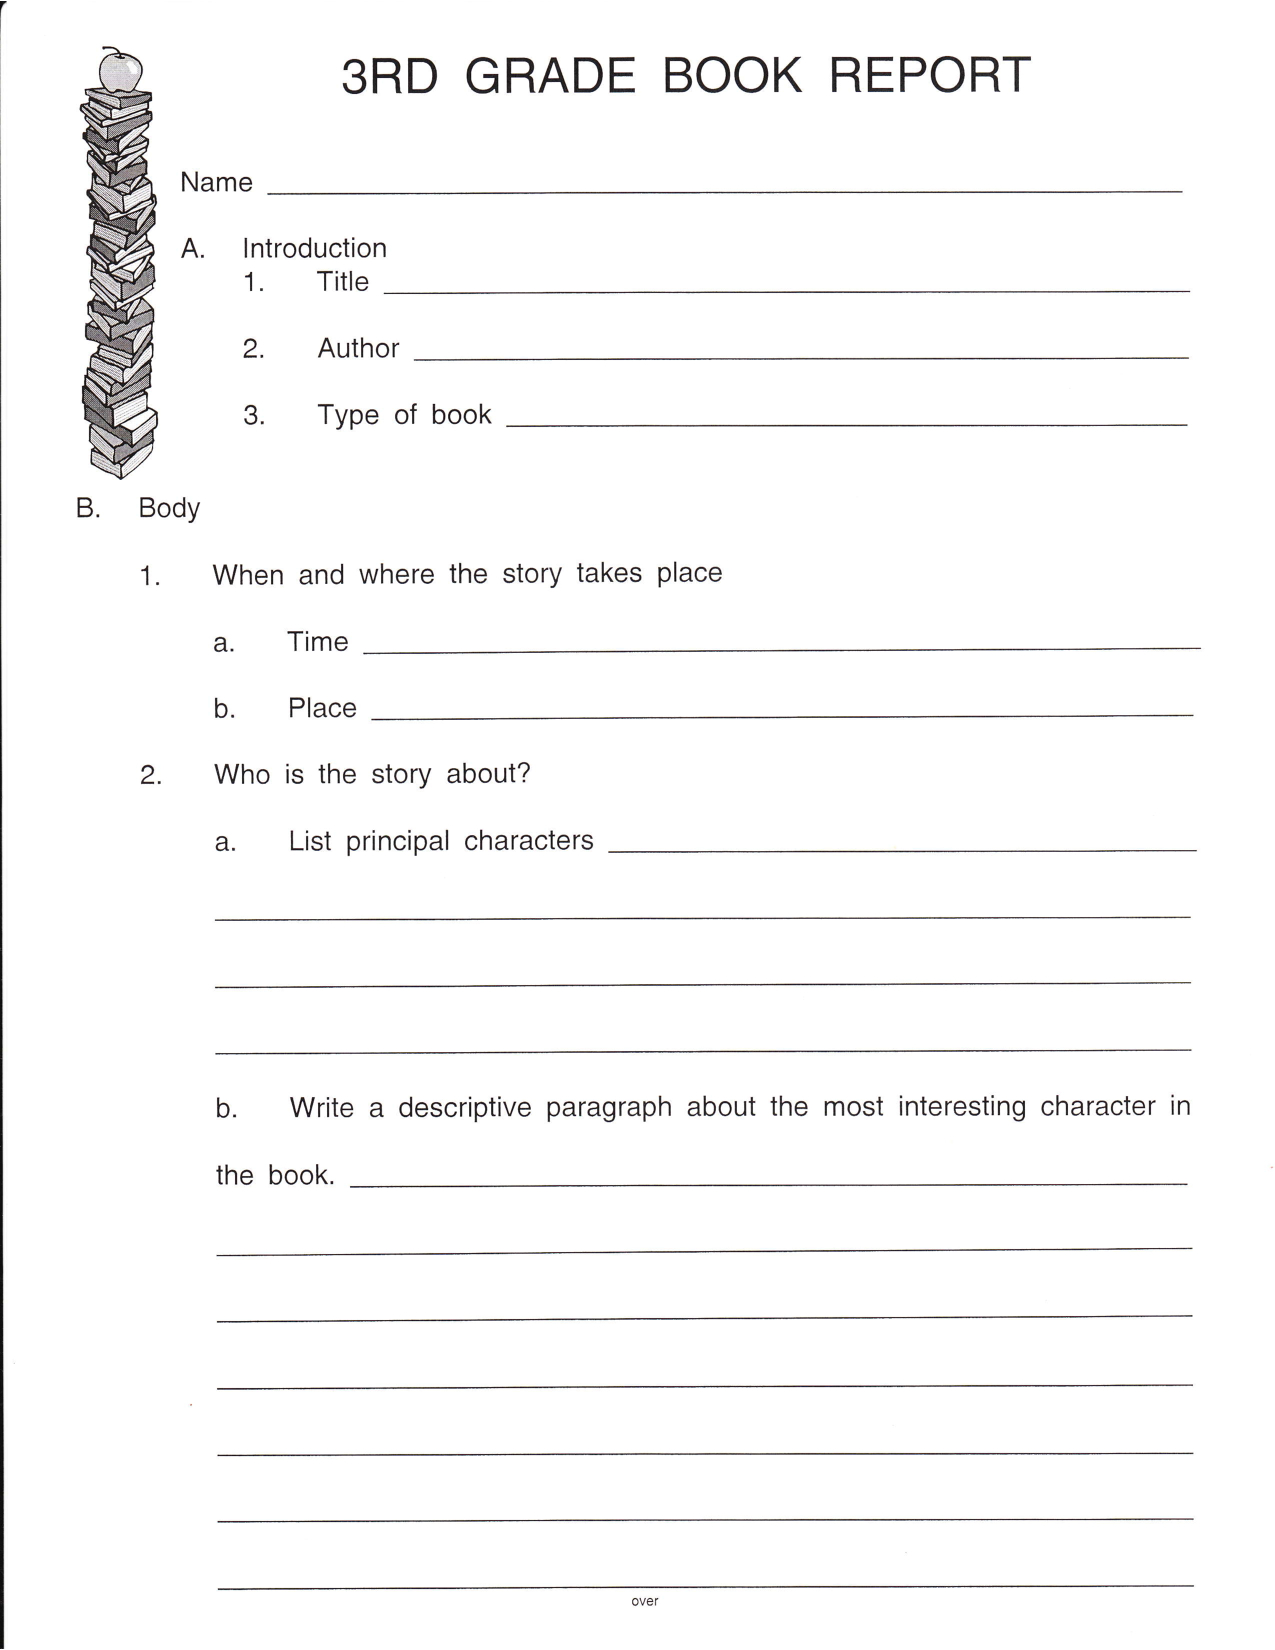 Pinshelena Schweitzer On Classroom Reading | Book Report Intended For First Grade Book Report Template